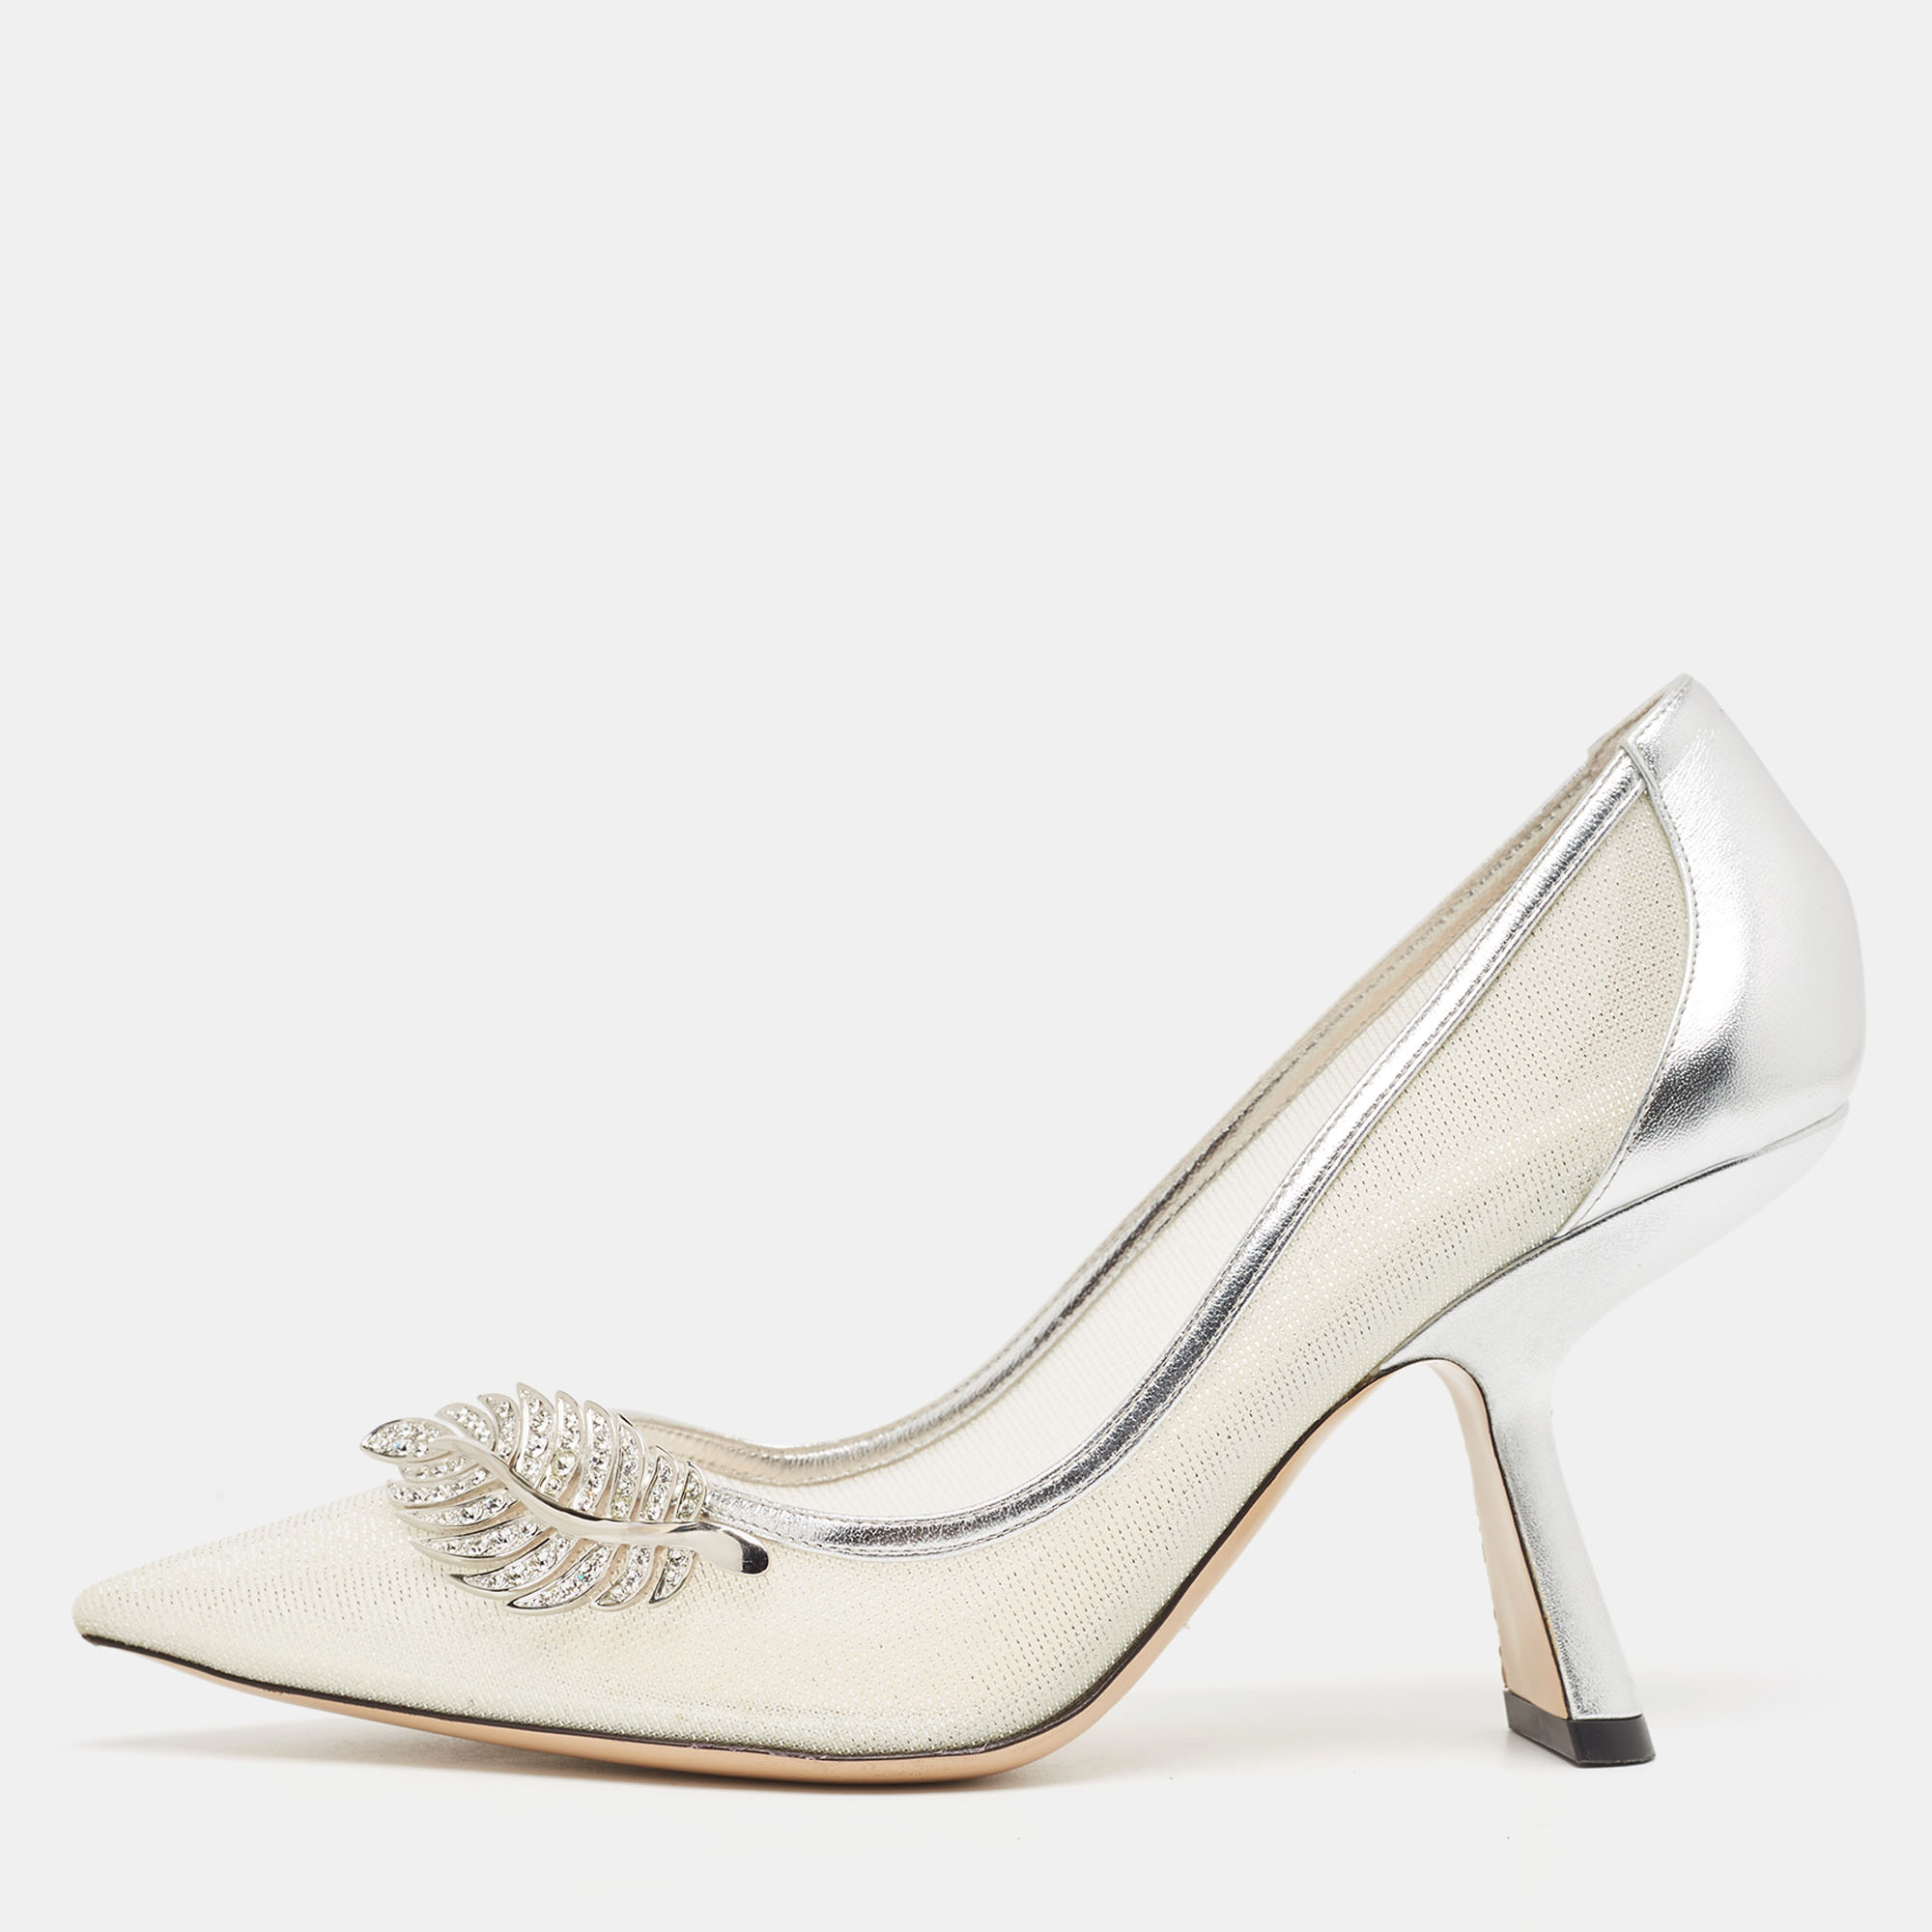 These pumps hail from Nicholas Kirkwood and are great for special occasions. Crafted from leather they come in a lovely shade of silver. They carry pointed toes crystal embellished uppers silver tone hardware and 9.5 cm heels. They are finished with leather soles.